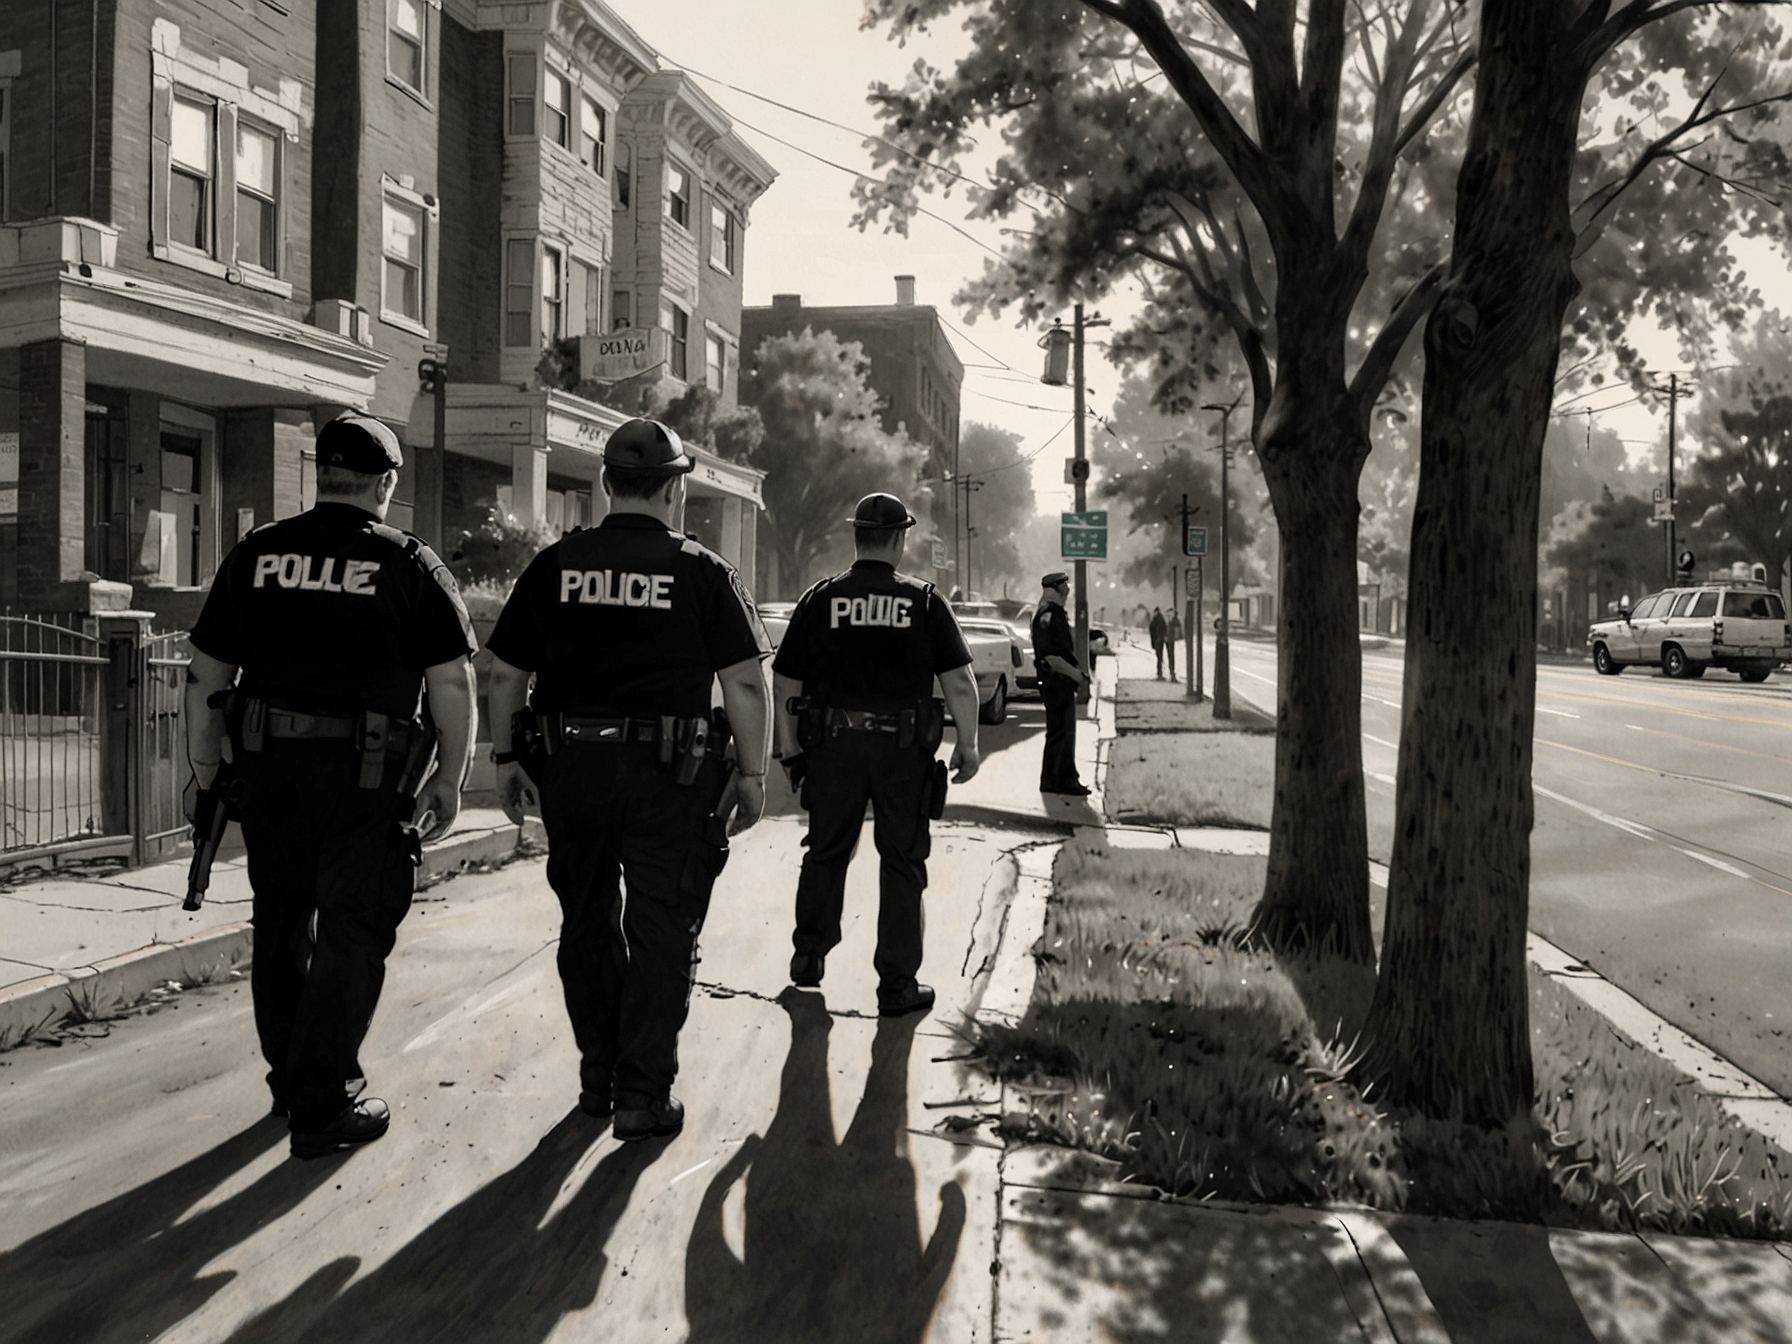 Richmond Police officers conducting increased patrols around the area where the fatal shootings occurred, as ongoing investigations aim to bring the perpetrators to justice.